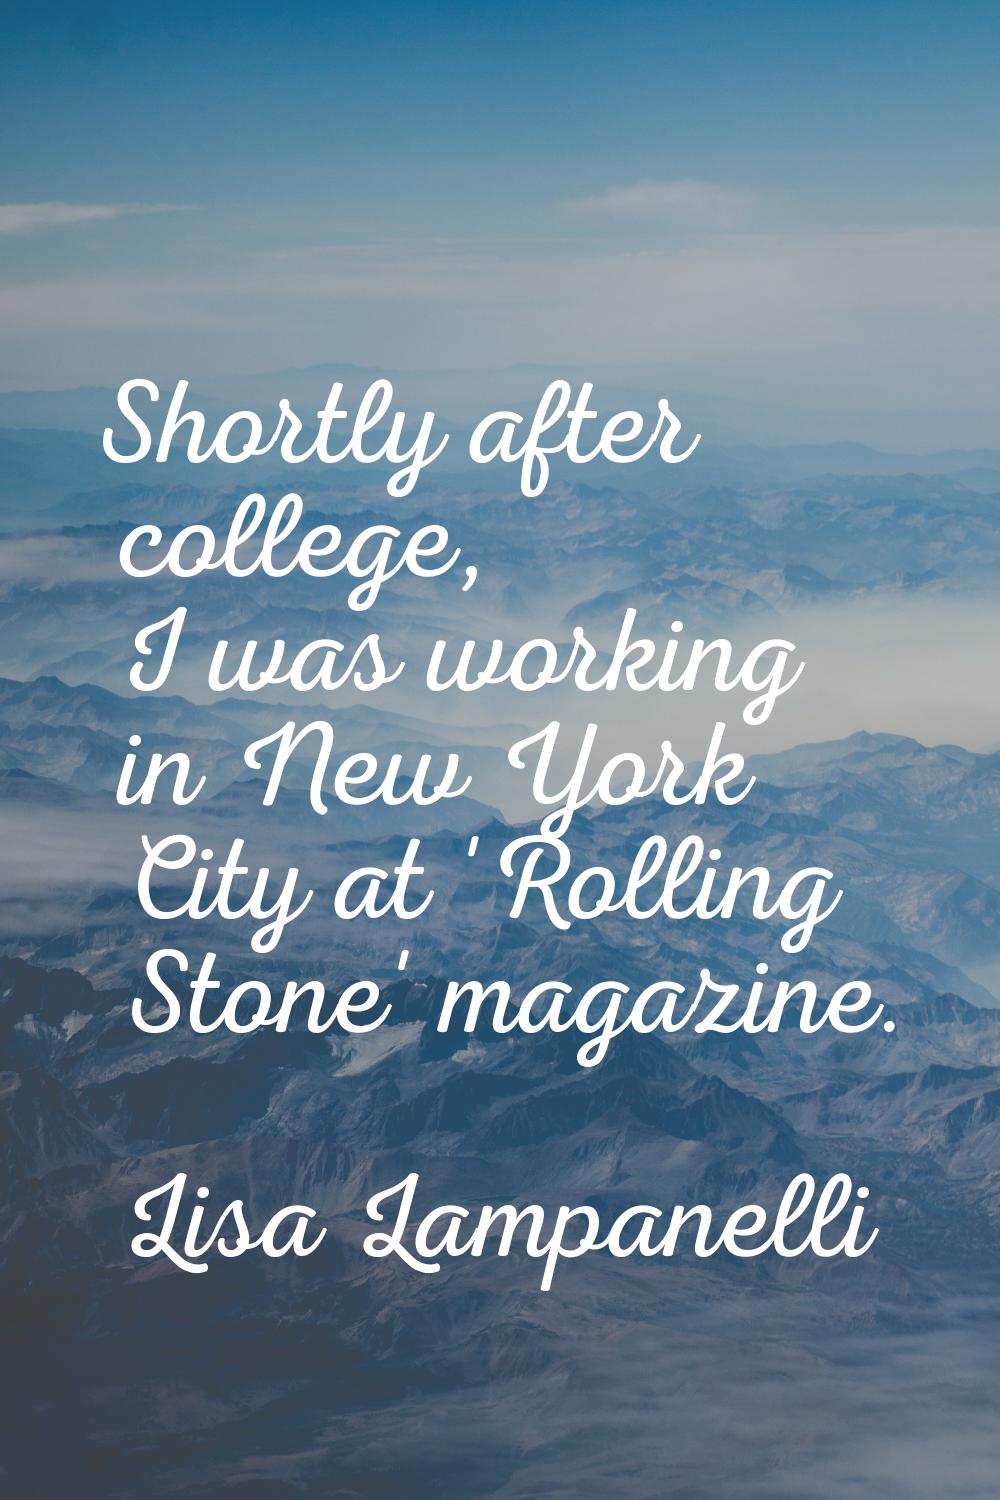 Shortly after college, I was working in New York City at 'Rolling Stone' magazine.